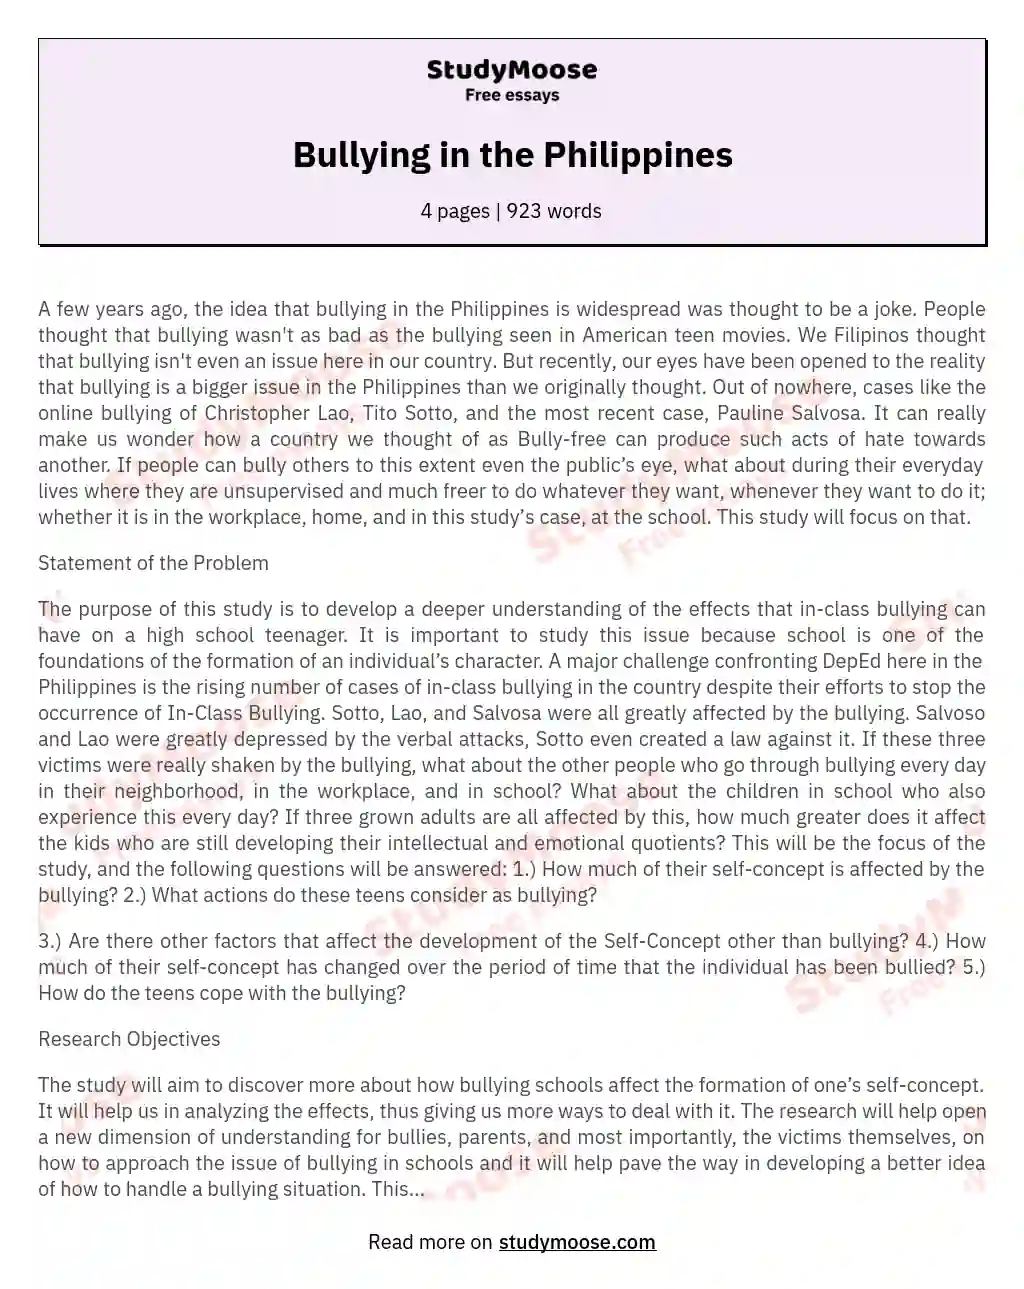 essay about bullying in the philippines